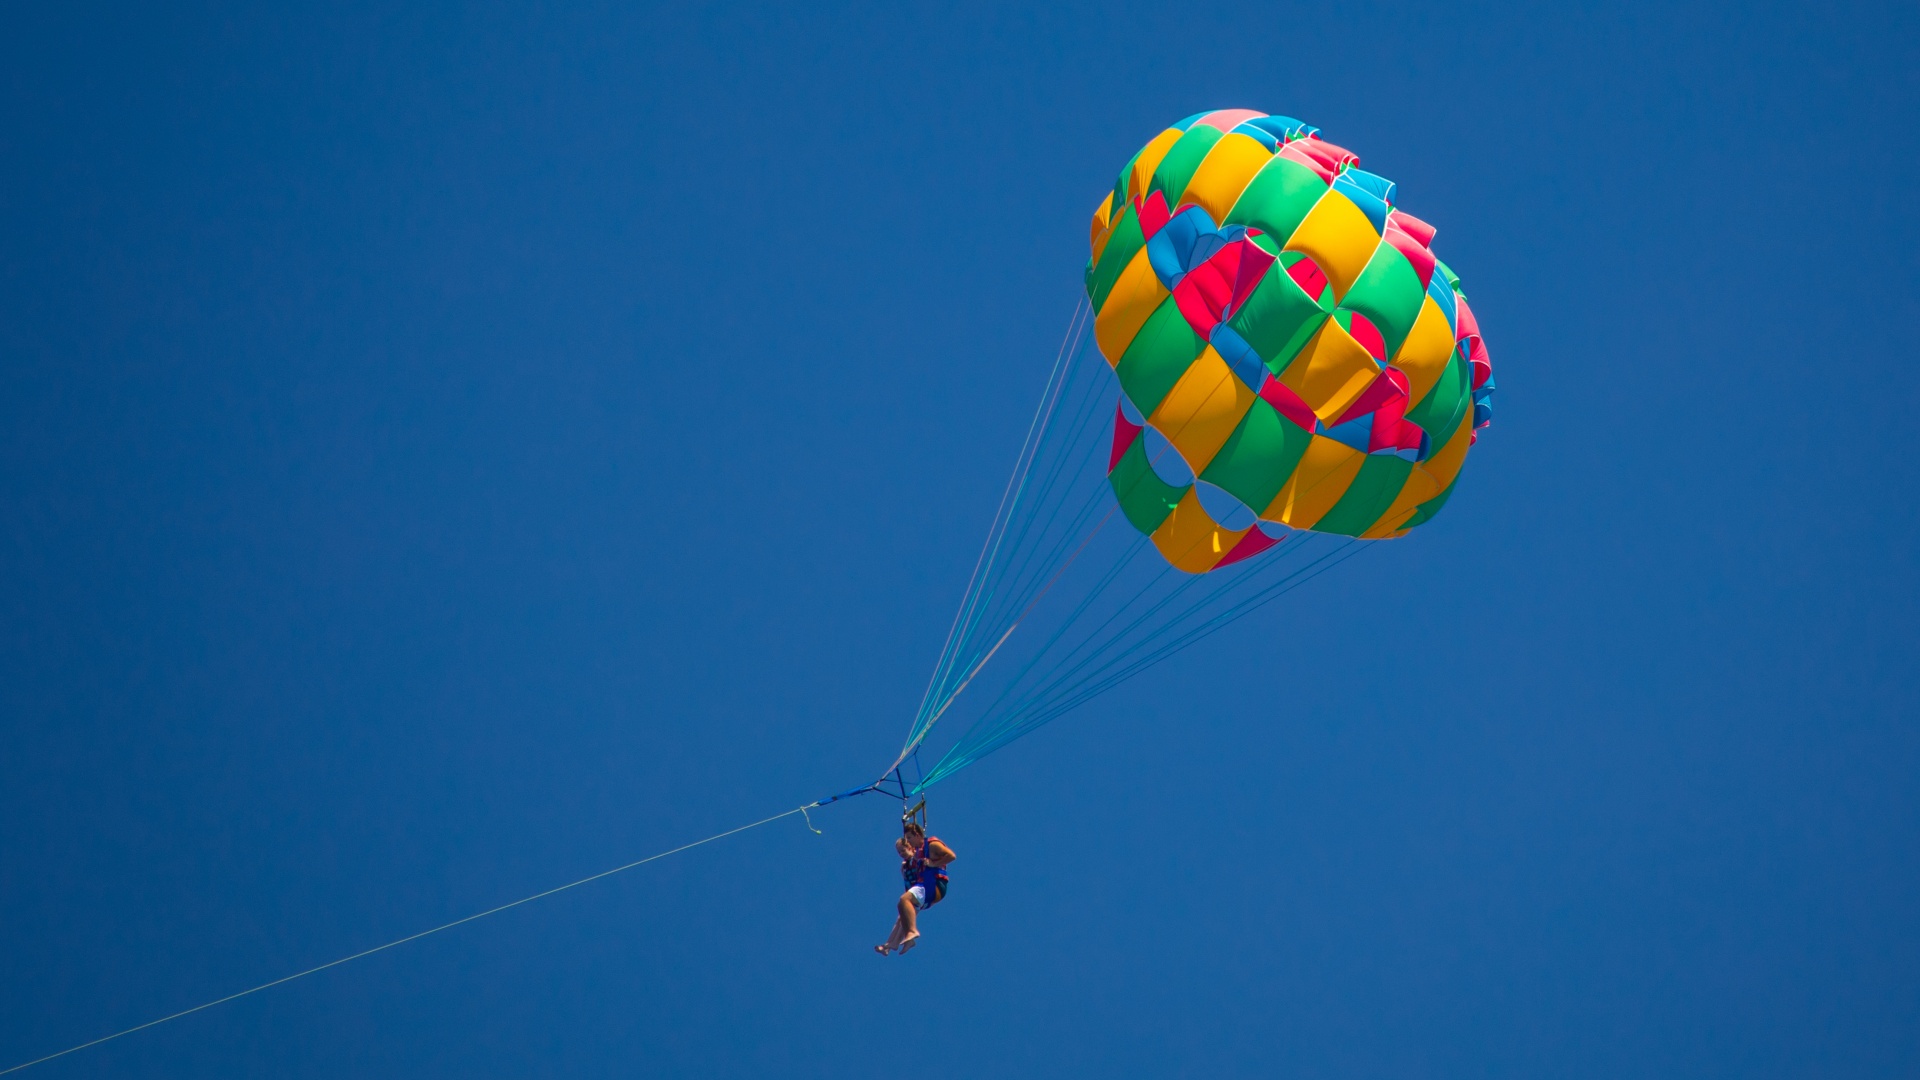 Parachute For Parasailing On Beach On A Sunny Summer Day 